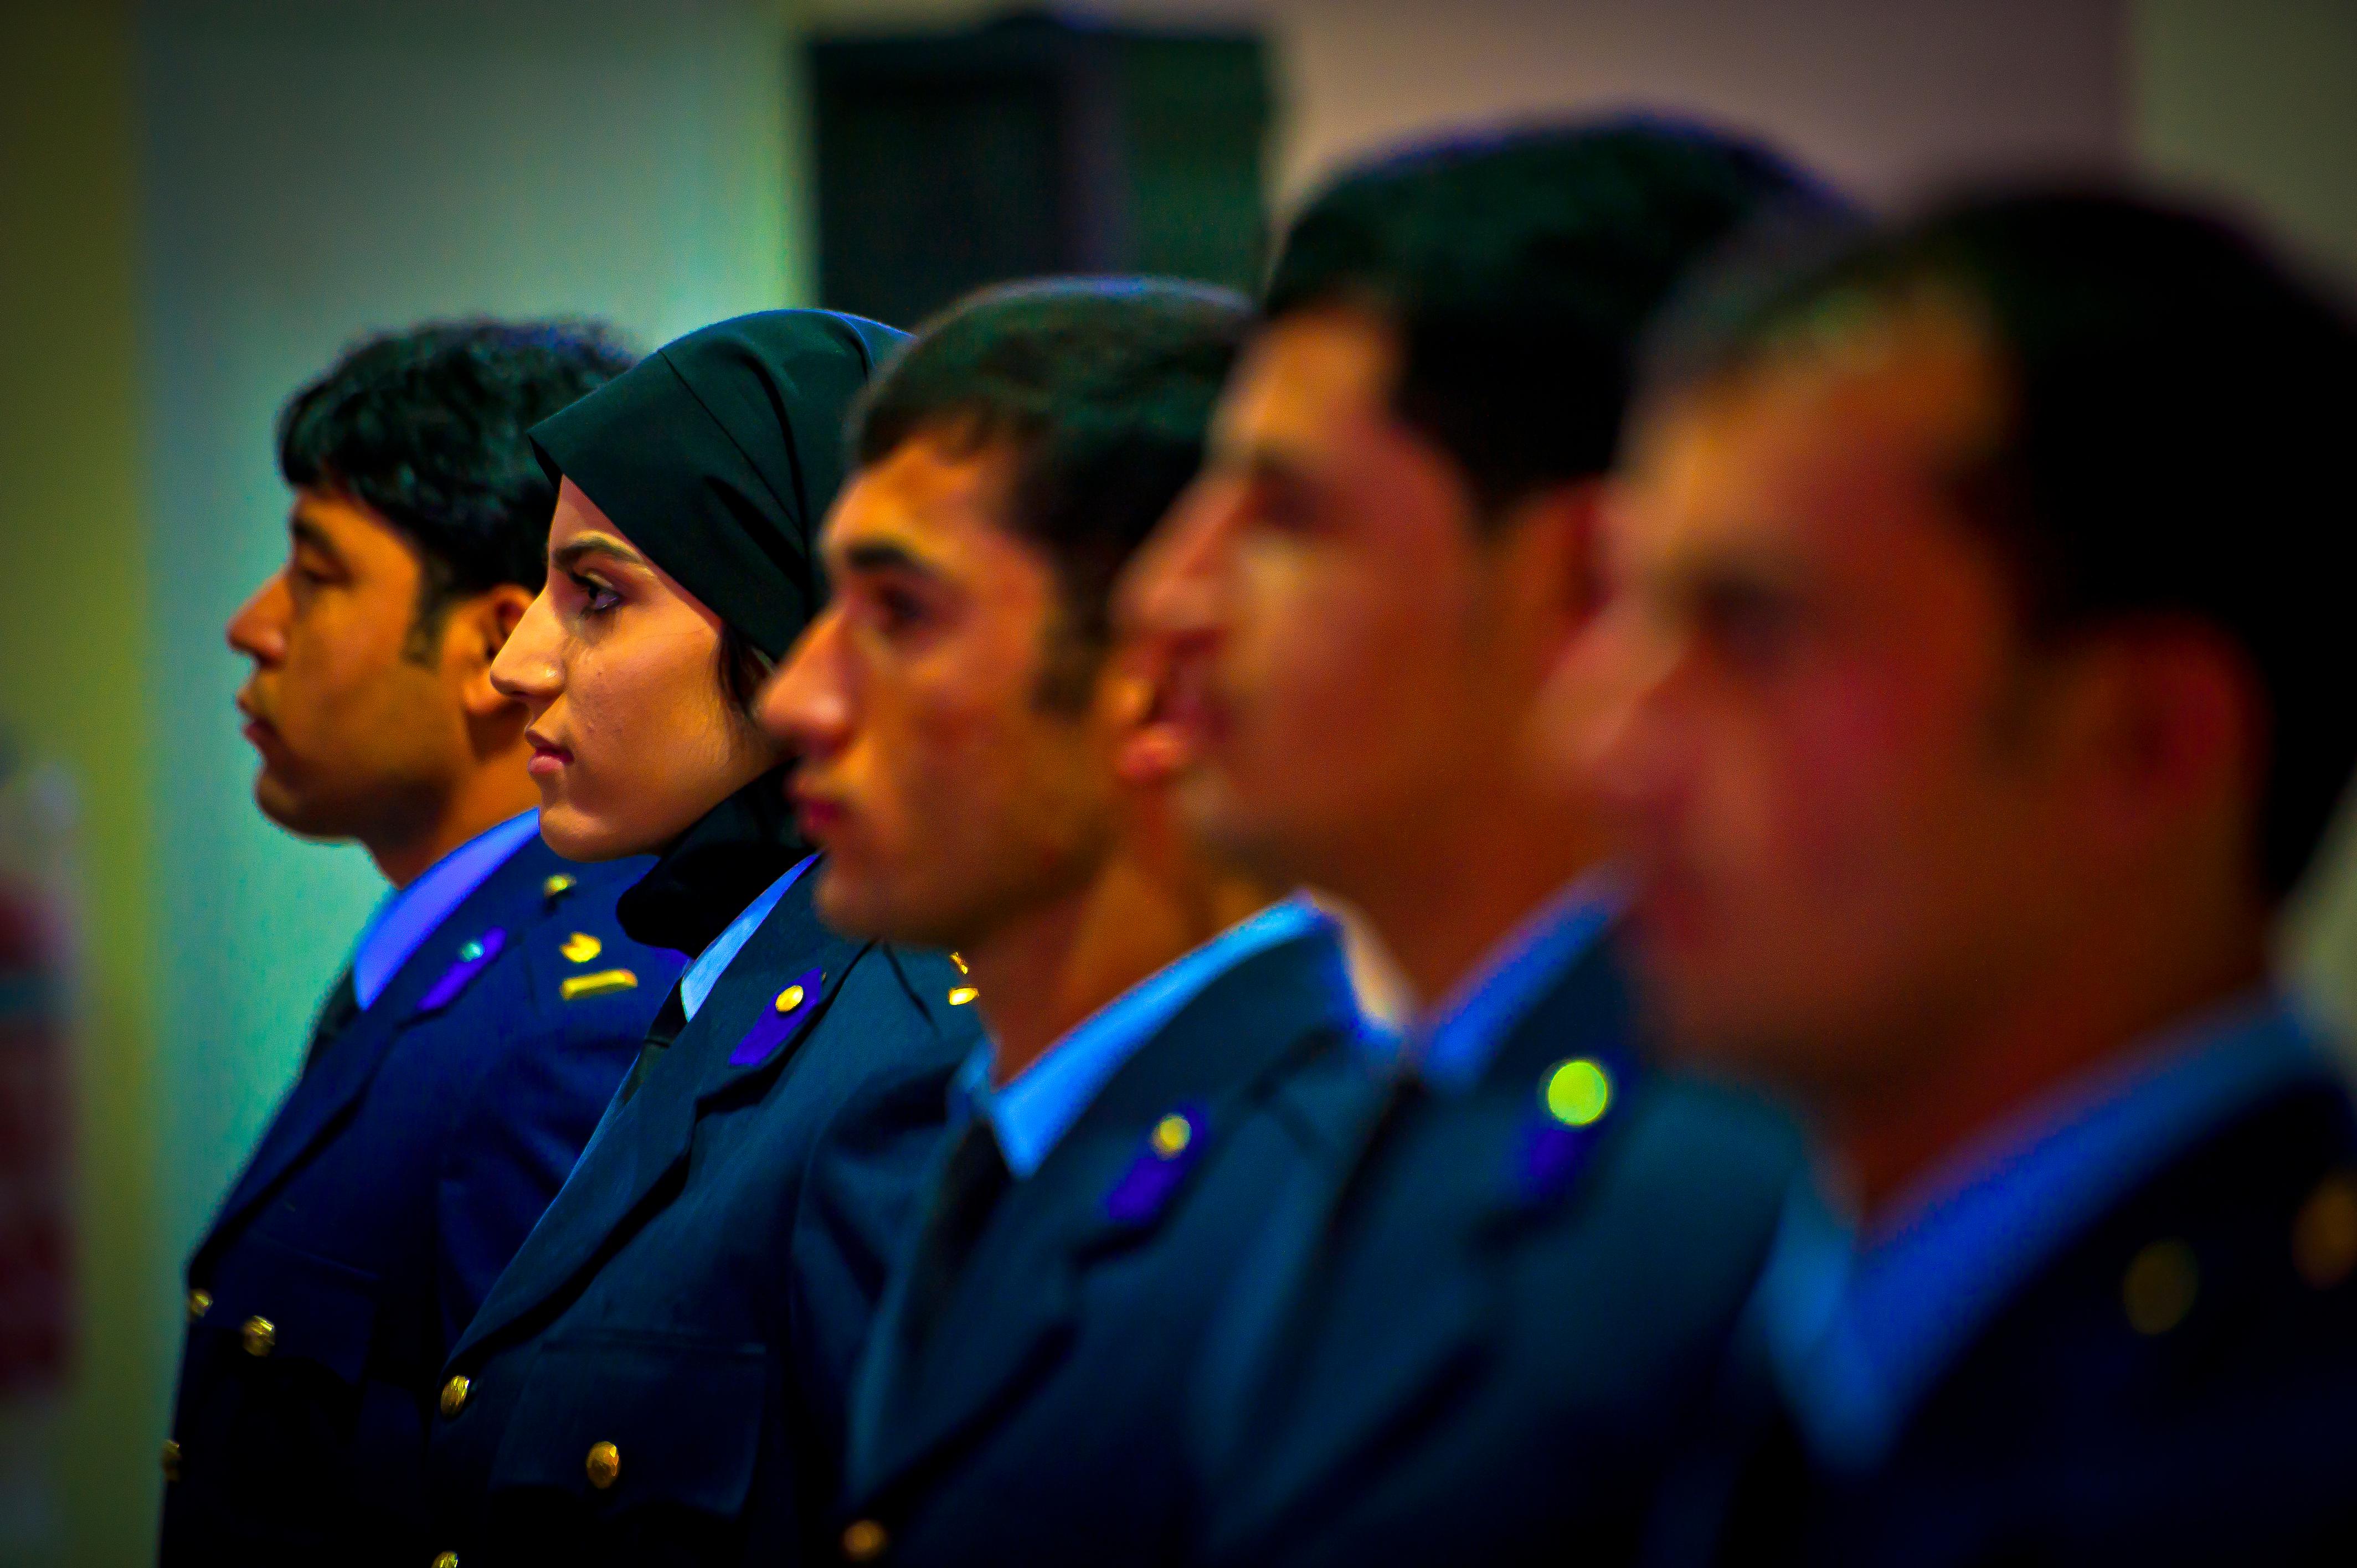 Afghan air force 2nd Lt. Niloofar Rhmani stands alongside the other four graduates of undergraduate pilot training just prior to receiving their pilot wings at a ceremony May 14, 2013, at Shindand Air Base, Afghanistan. Rhmani made history May 14, 2013, when she became the first female to successfully complete undergraduate pilot training and earn the status of pilot in more than 30 years. She will continue her service as she joins the Kabul Air Wing as a Cessna 208 pilot. (U.S. Air Force photo/ Senior Airman Scott Saldukas)